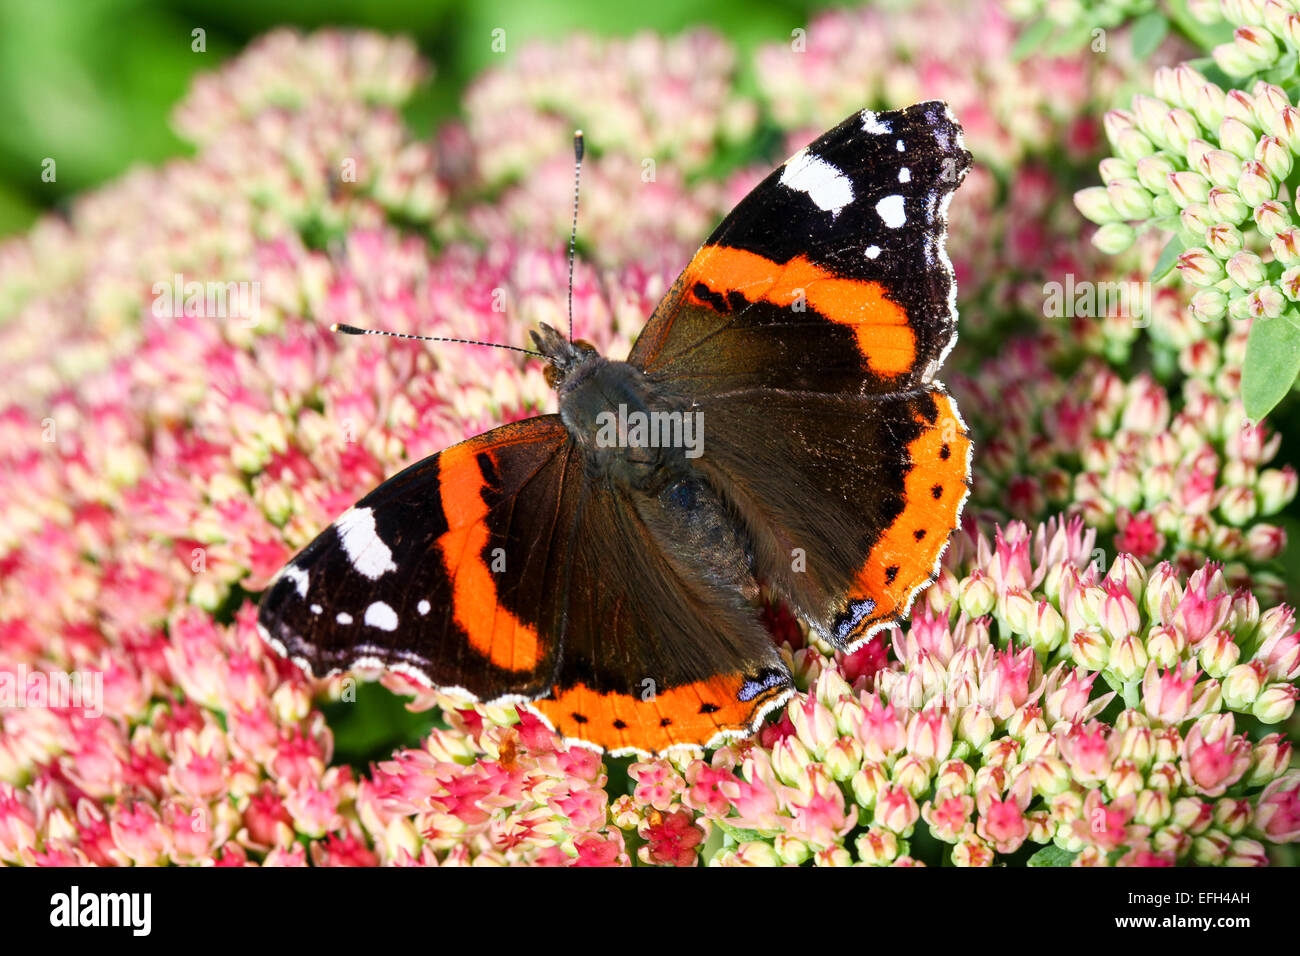 A close up shot of a Red Admiral butterfly (Vanessa Atalanta) resting on a pink Sedum flower, England, UK Stock Photo